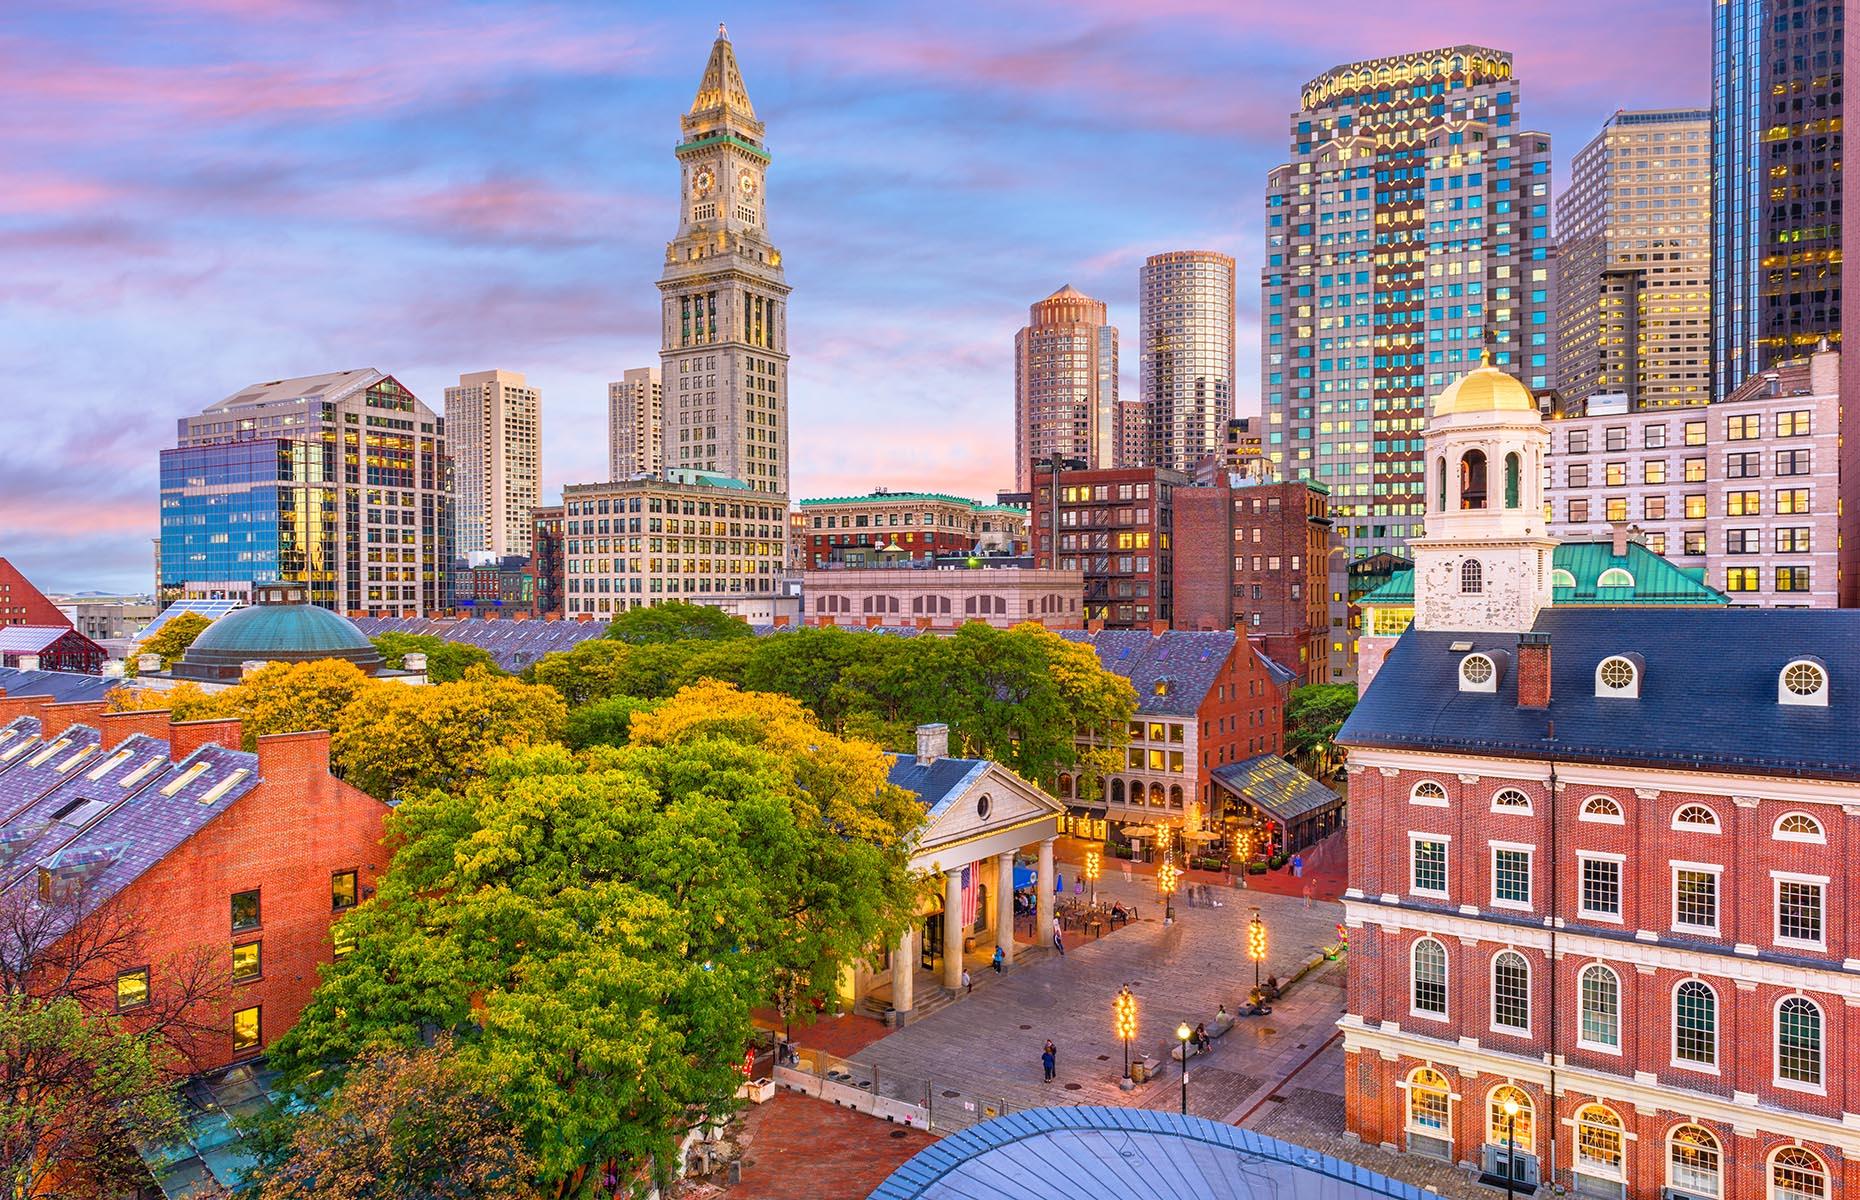 <p>New England’s largest city, <a href="https://www.loveexploring.com/guides/76558/explore-boston-the-top-things-to-do-where-to-stay-what-to-eat">Boston</a> is so popular for many reasons, namely its history and heritage, luxury hotels and great food and drink culture. When you visit, be sure to walk the famous two-and-a-half-mile (4km) long <a href="https://www.thefreedomtrail.org/">Freedom Trail</a>, which takes you on a historic visit through Boston’s neighborhoods and tells the story of the American Revolution. It’s also home to plenty of child-friendly attractions, including <a href="https://www.neaq.org/">New England Aquarium</a> and <a href="https://www.bostonchildrensmuseum.org/">Boston Children’s Museum</a>. Here's <a href="https://www.bostonusa.com/covid-19/">everything you need to know about visiting during COVID-19</a>.</p>